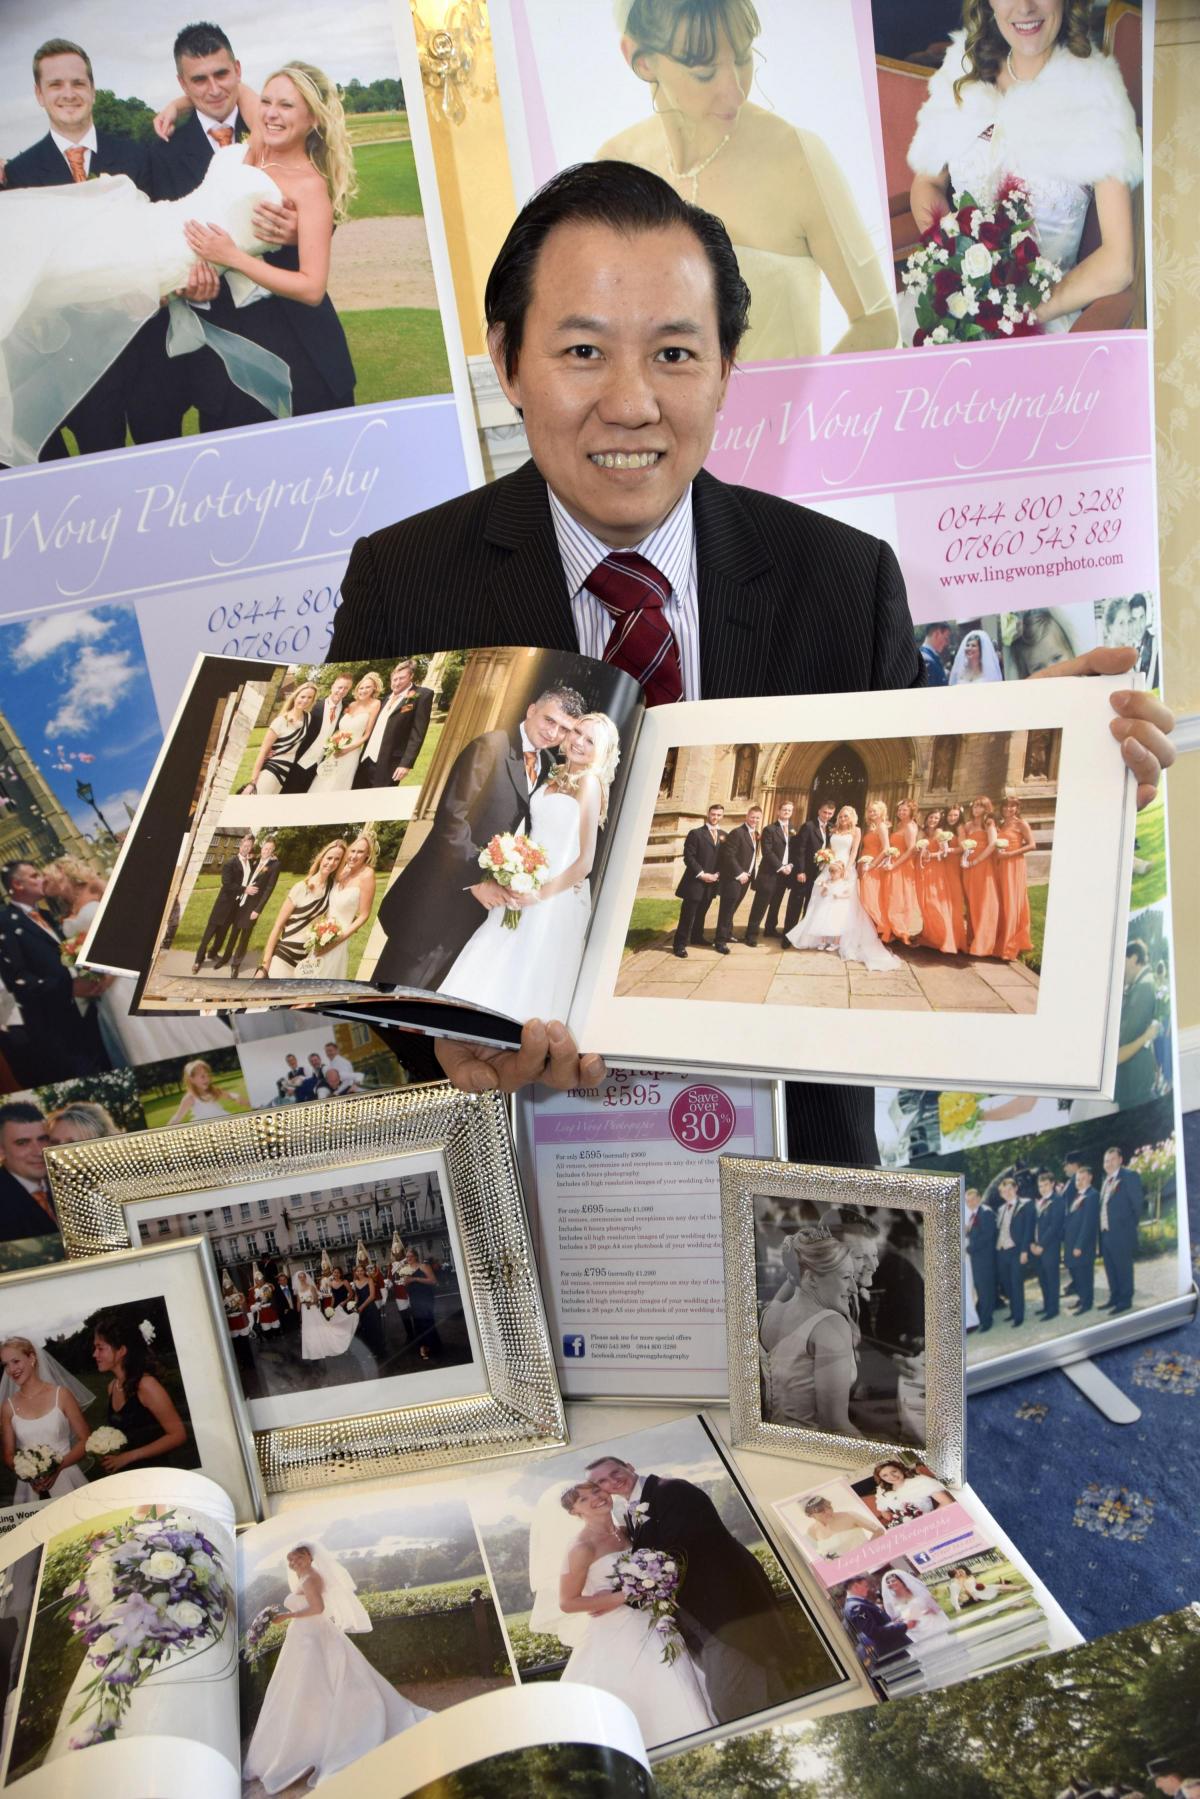 Ling Wong Wedding Photographer with his work